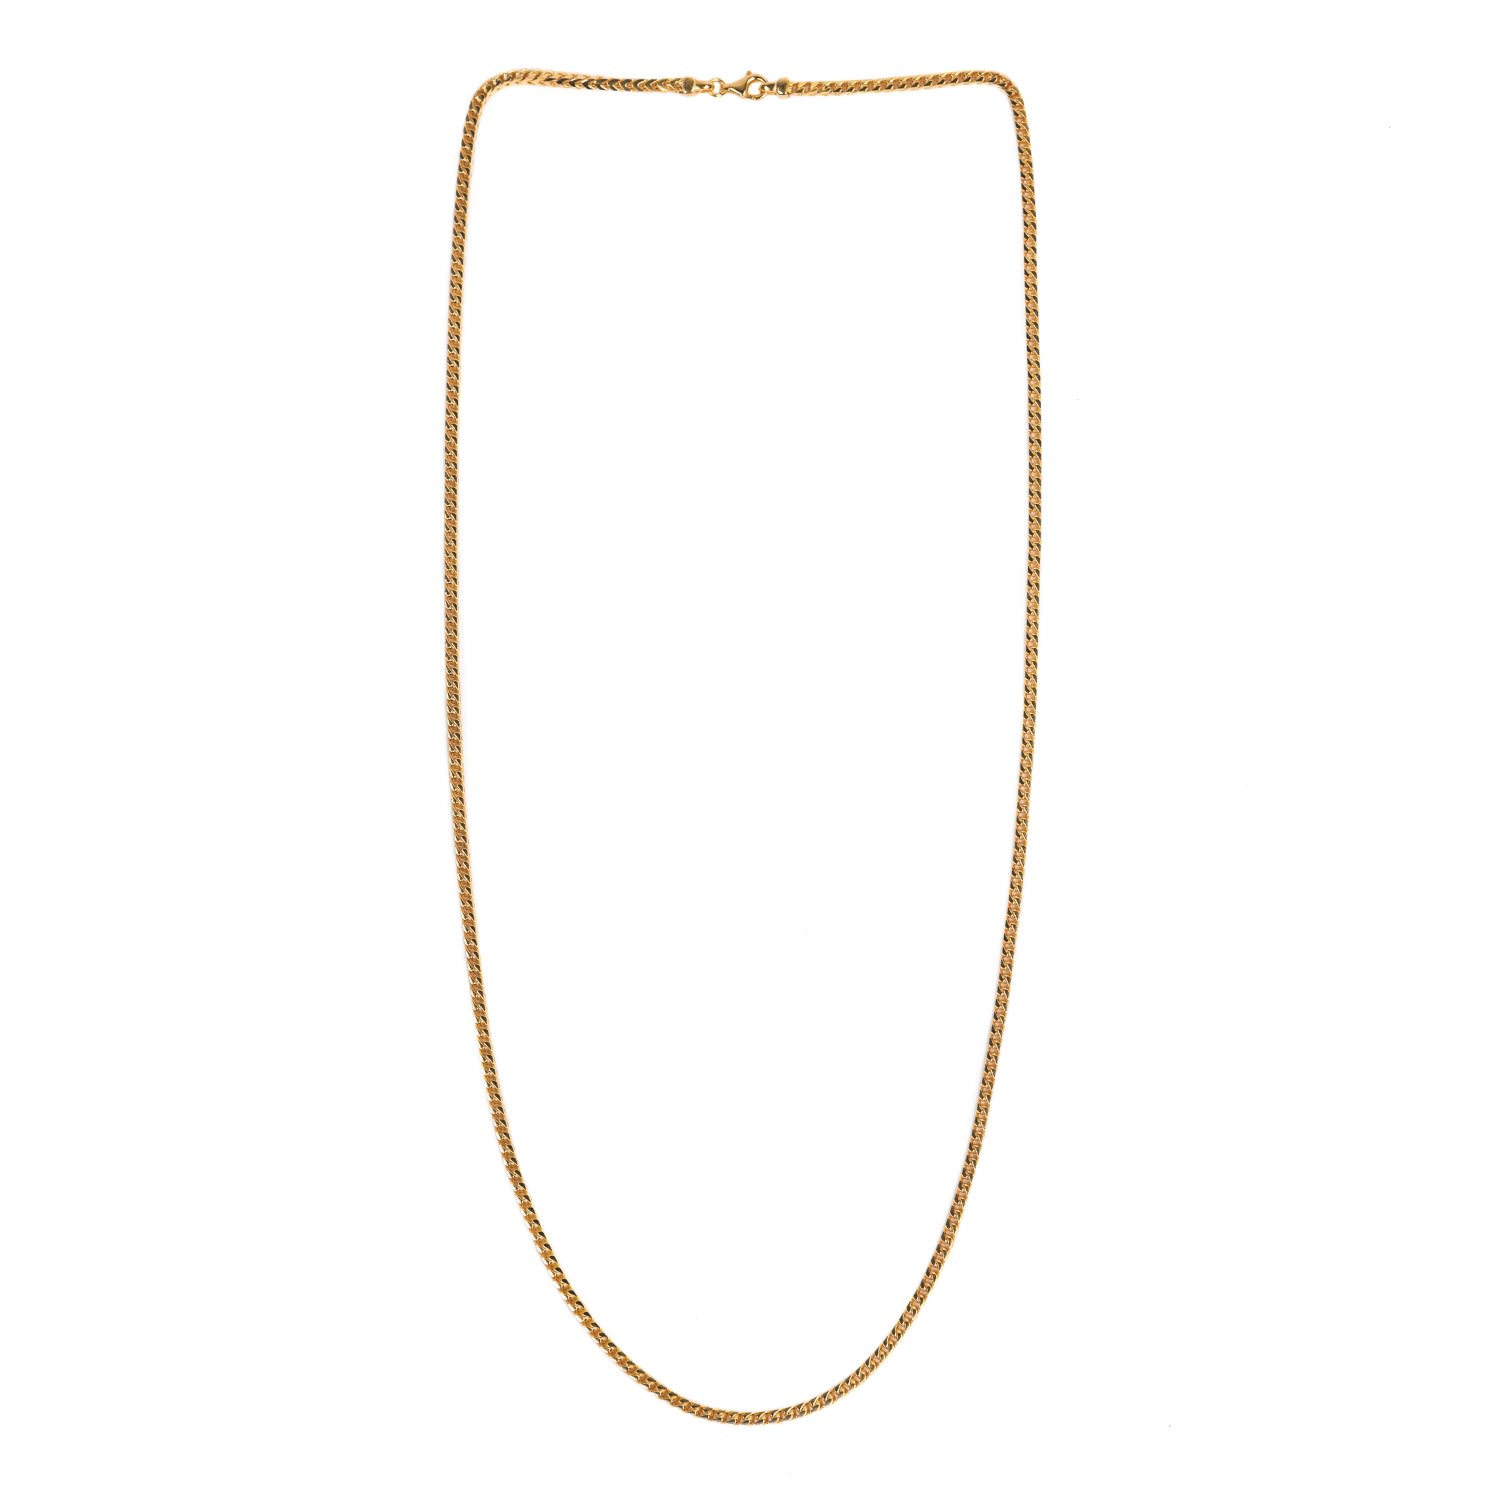 Men's 3Mm Italian Made Franco Chain Necklace Gold - Long Undefined Jewelry